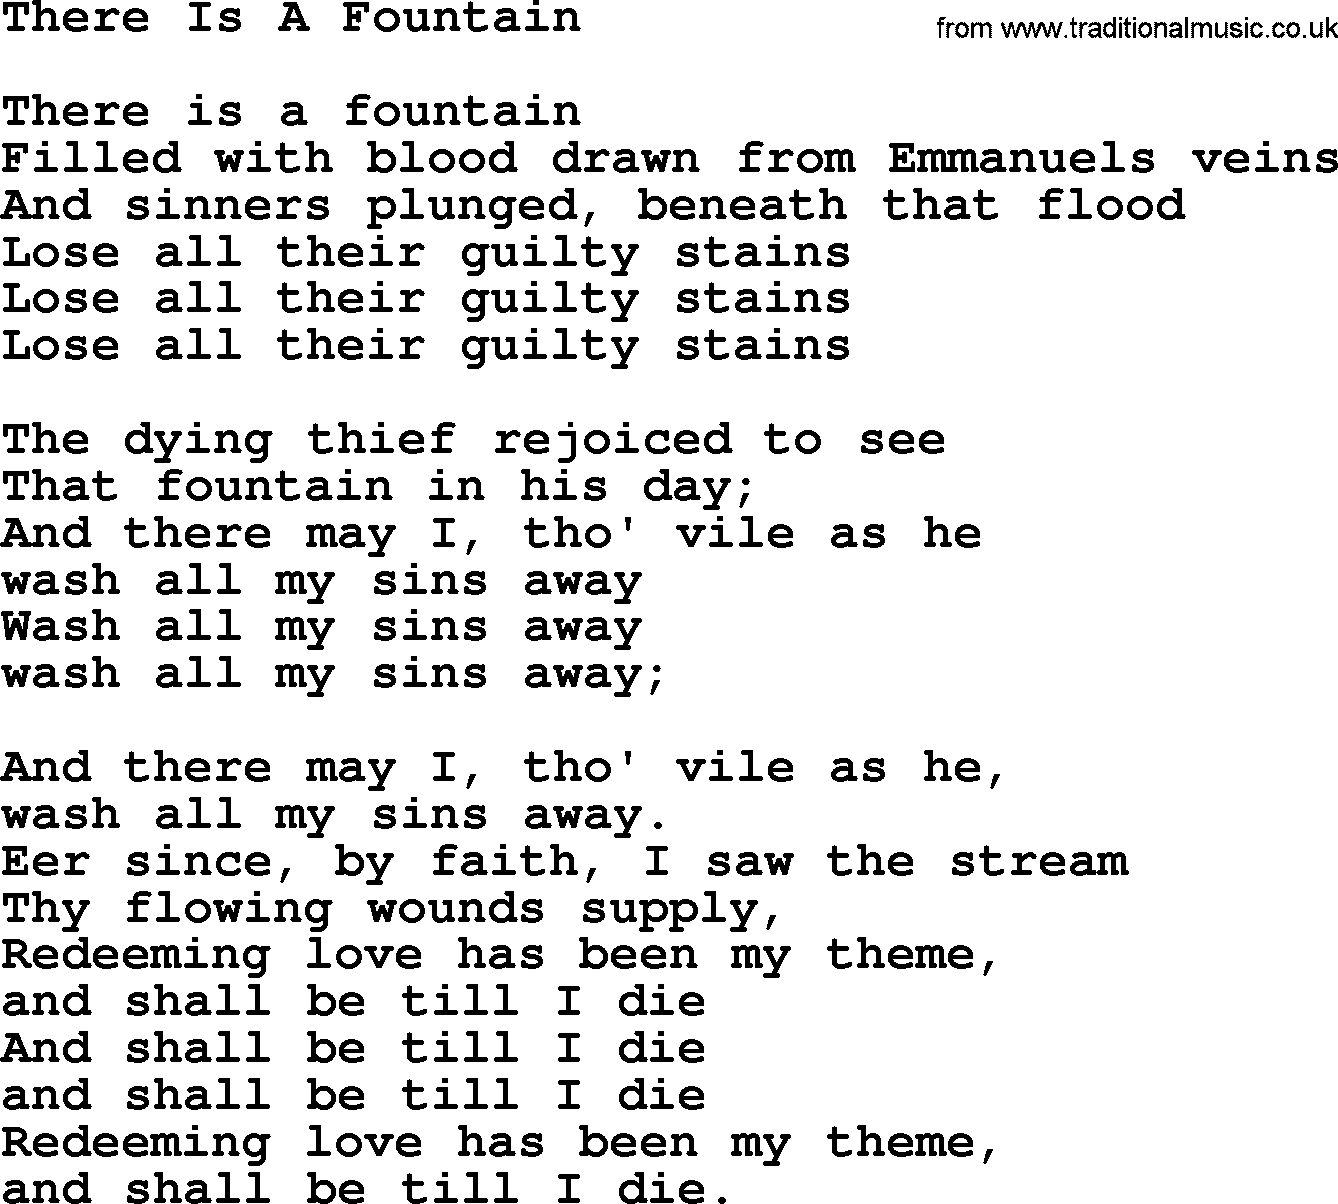 Willie Nelson song: There Is A Fountain lyrics